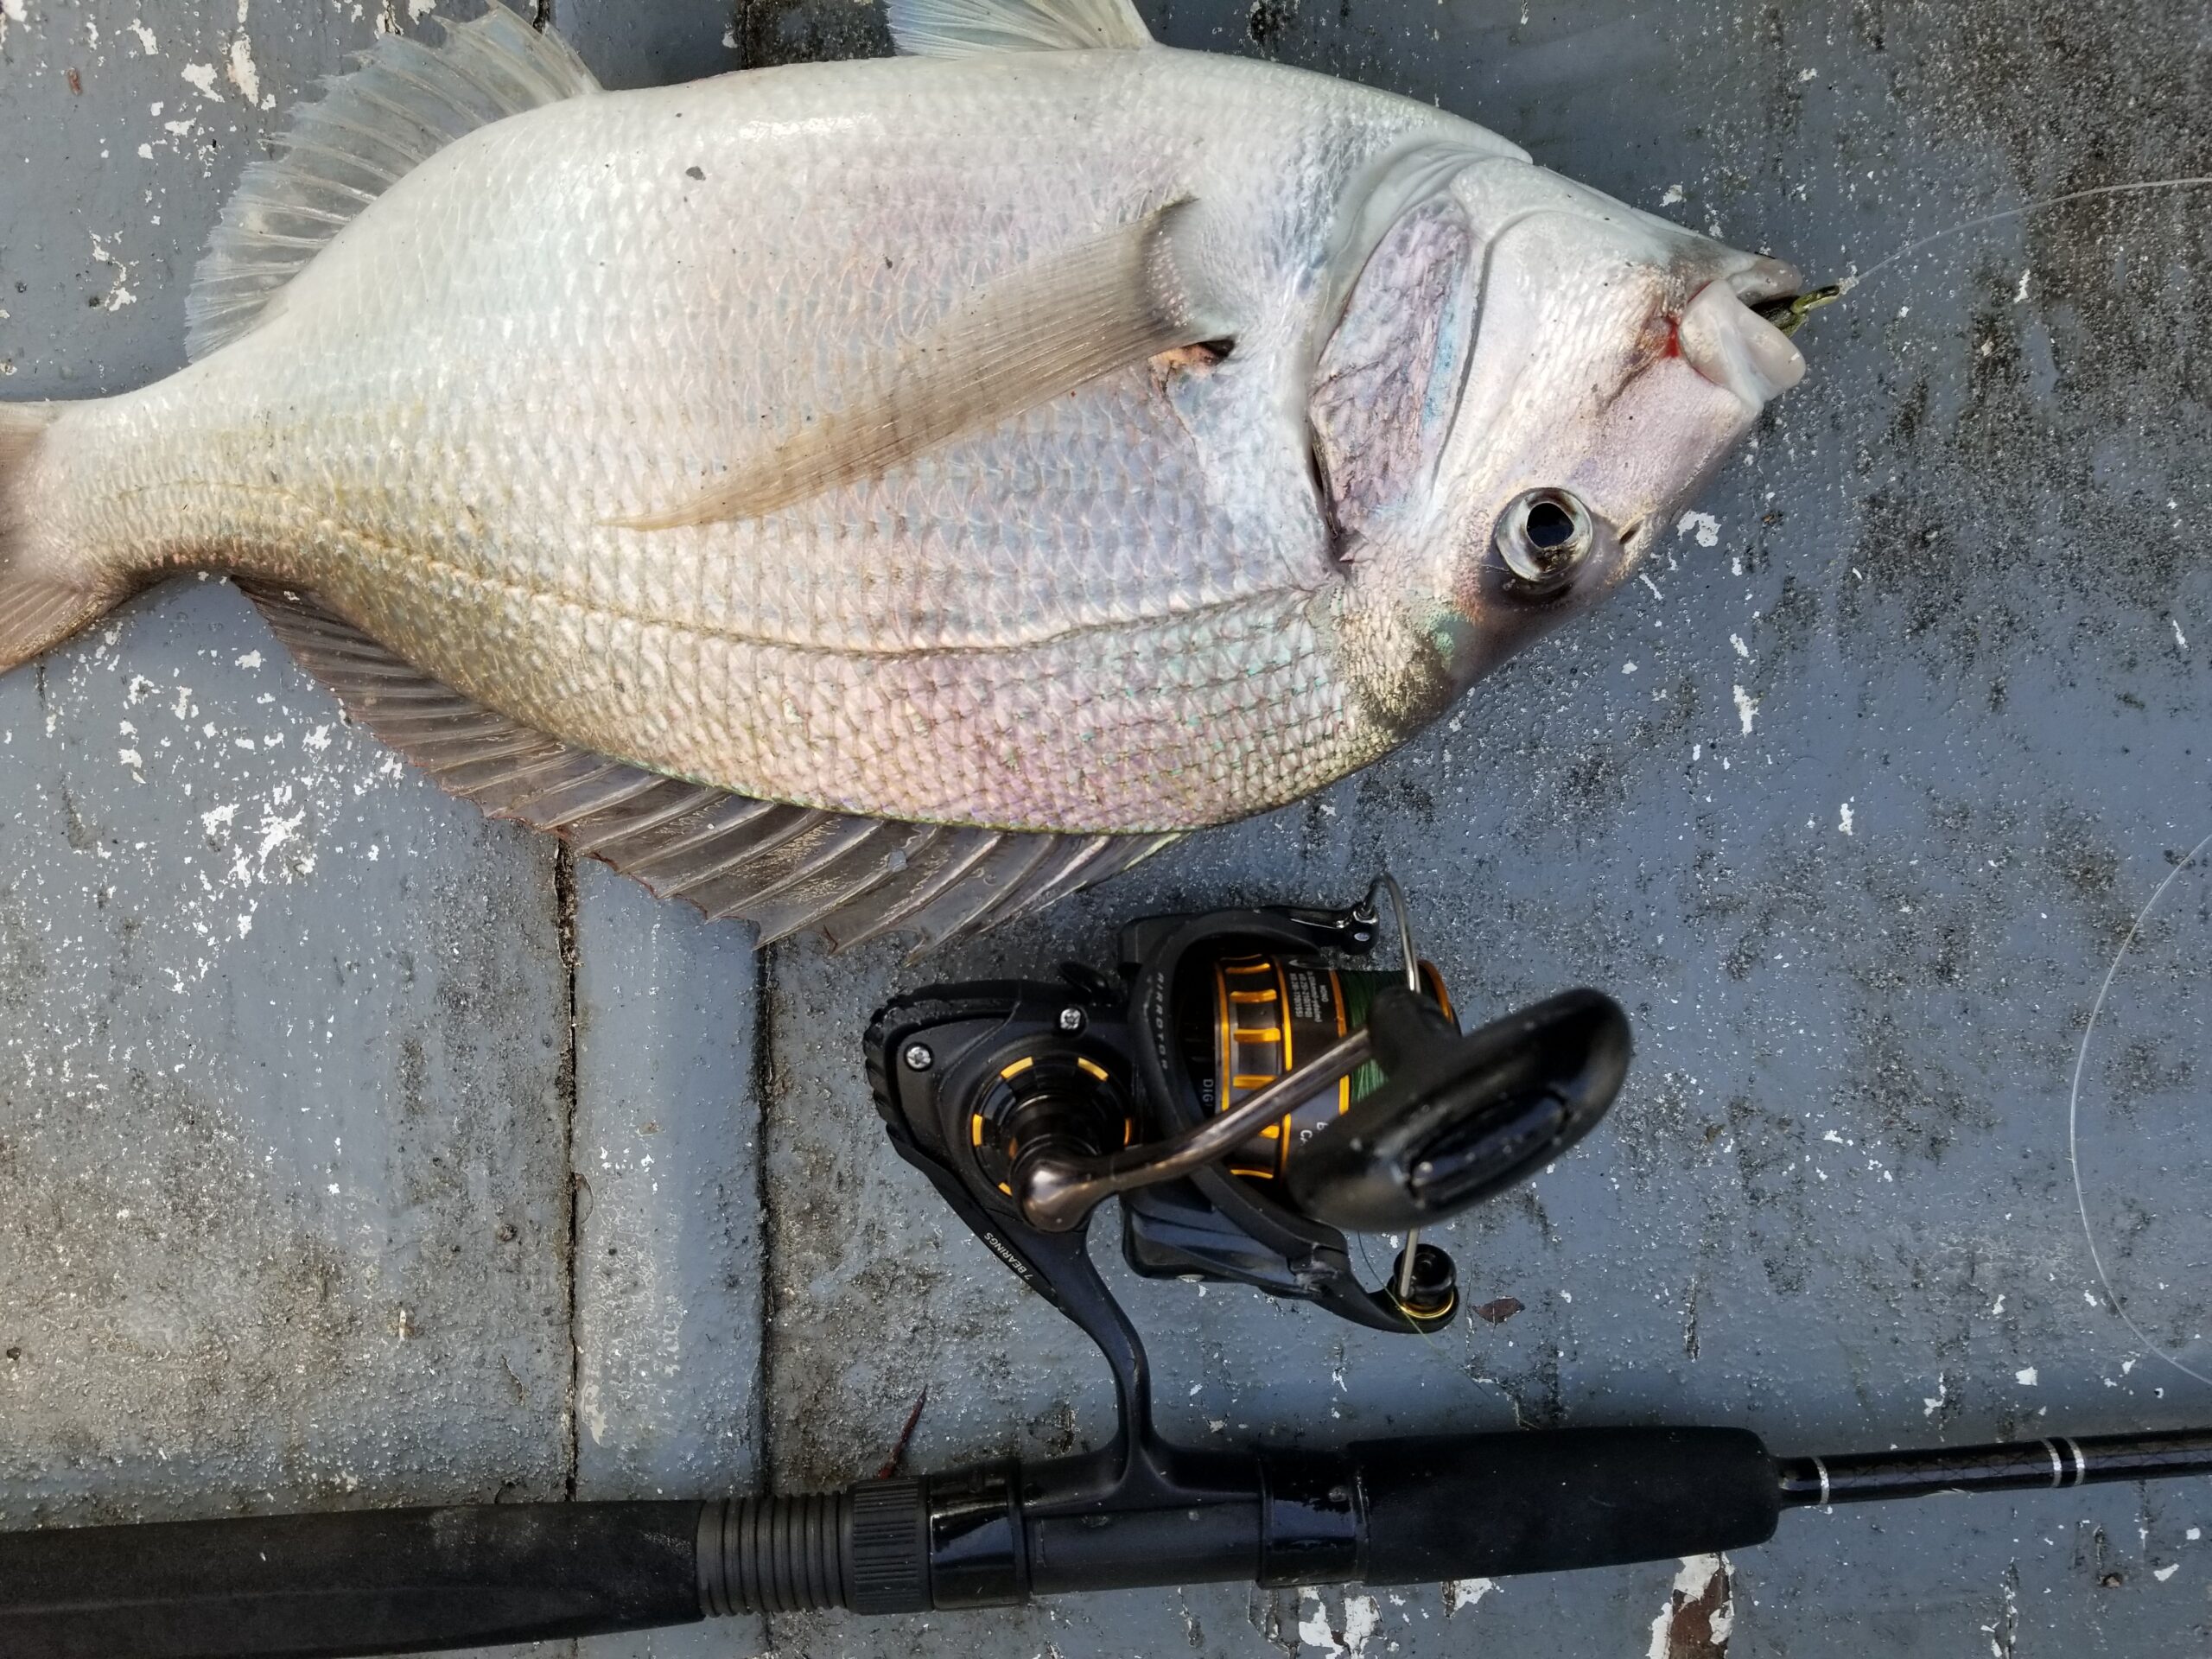 A silver porgy fish on the dock of a boat